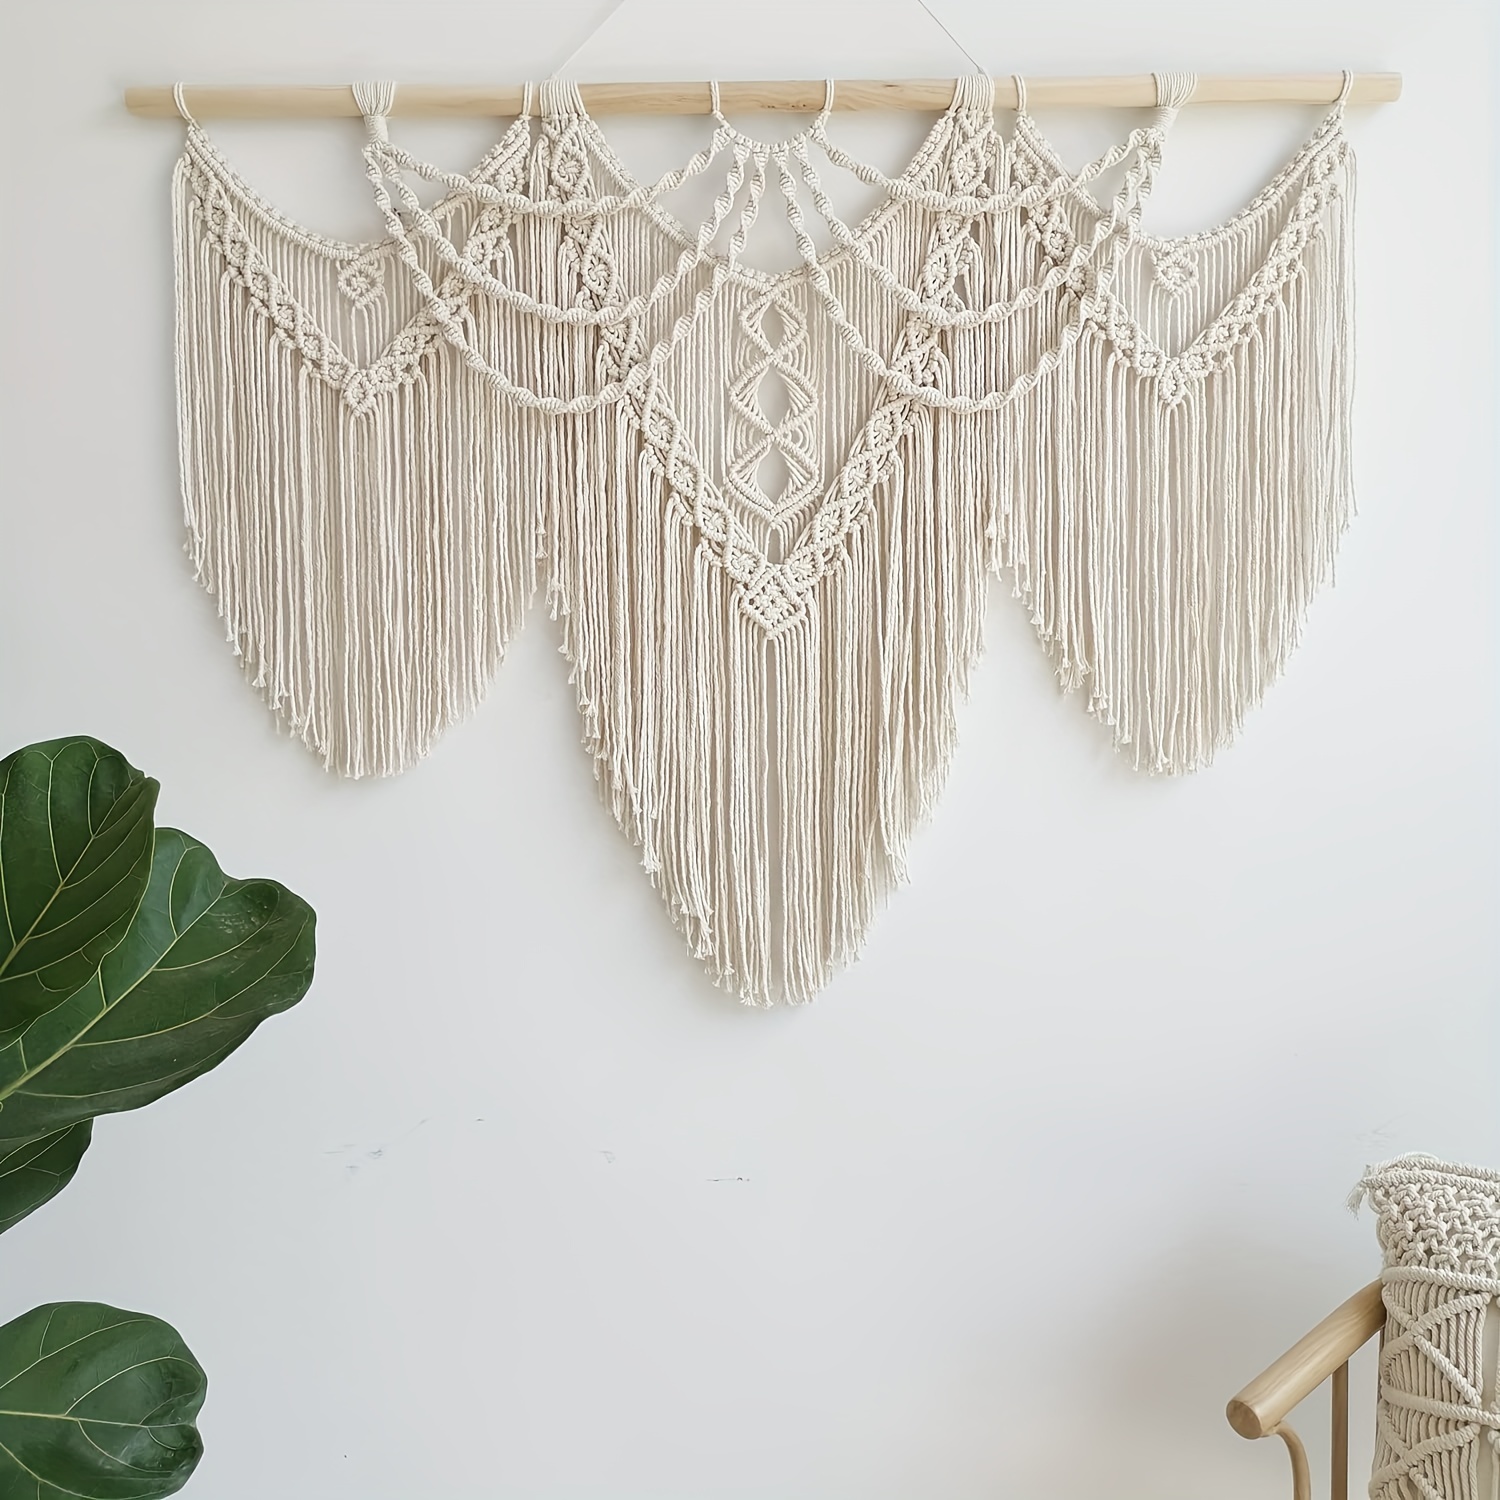 1pc large macrame wall hanging boho tapestry macrame wall decor art chic bohemian handmade woven tapestry for bedroom living room apartment wedding party home decor 43 x32